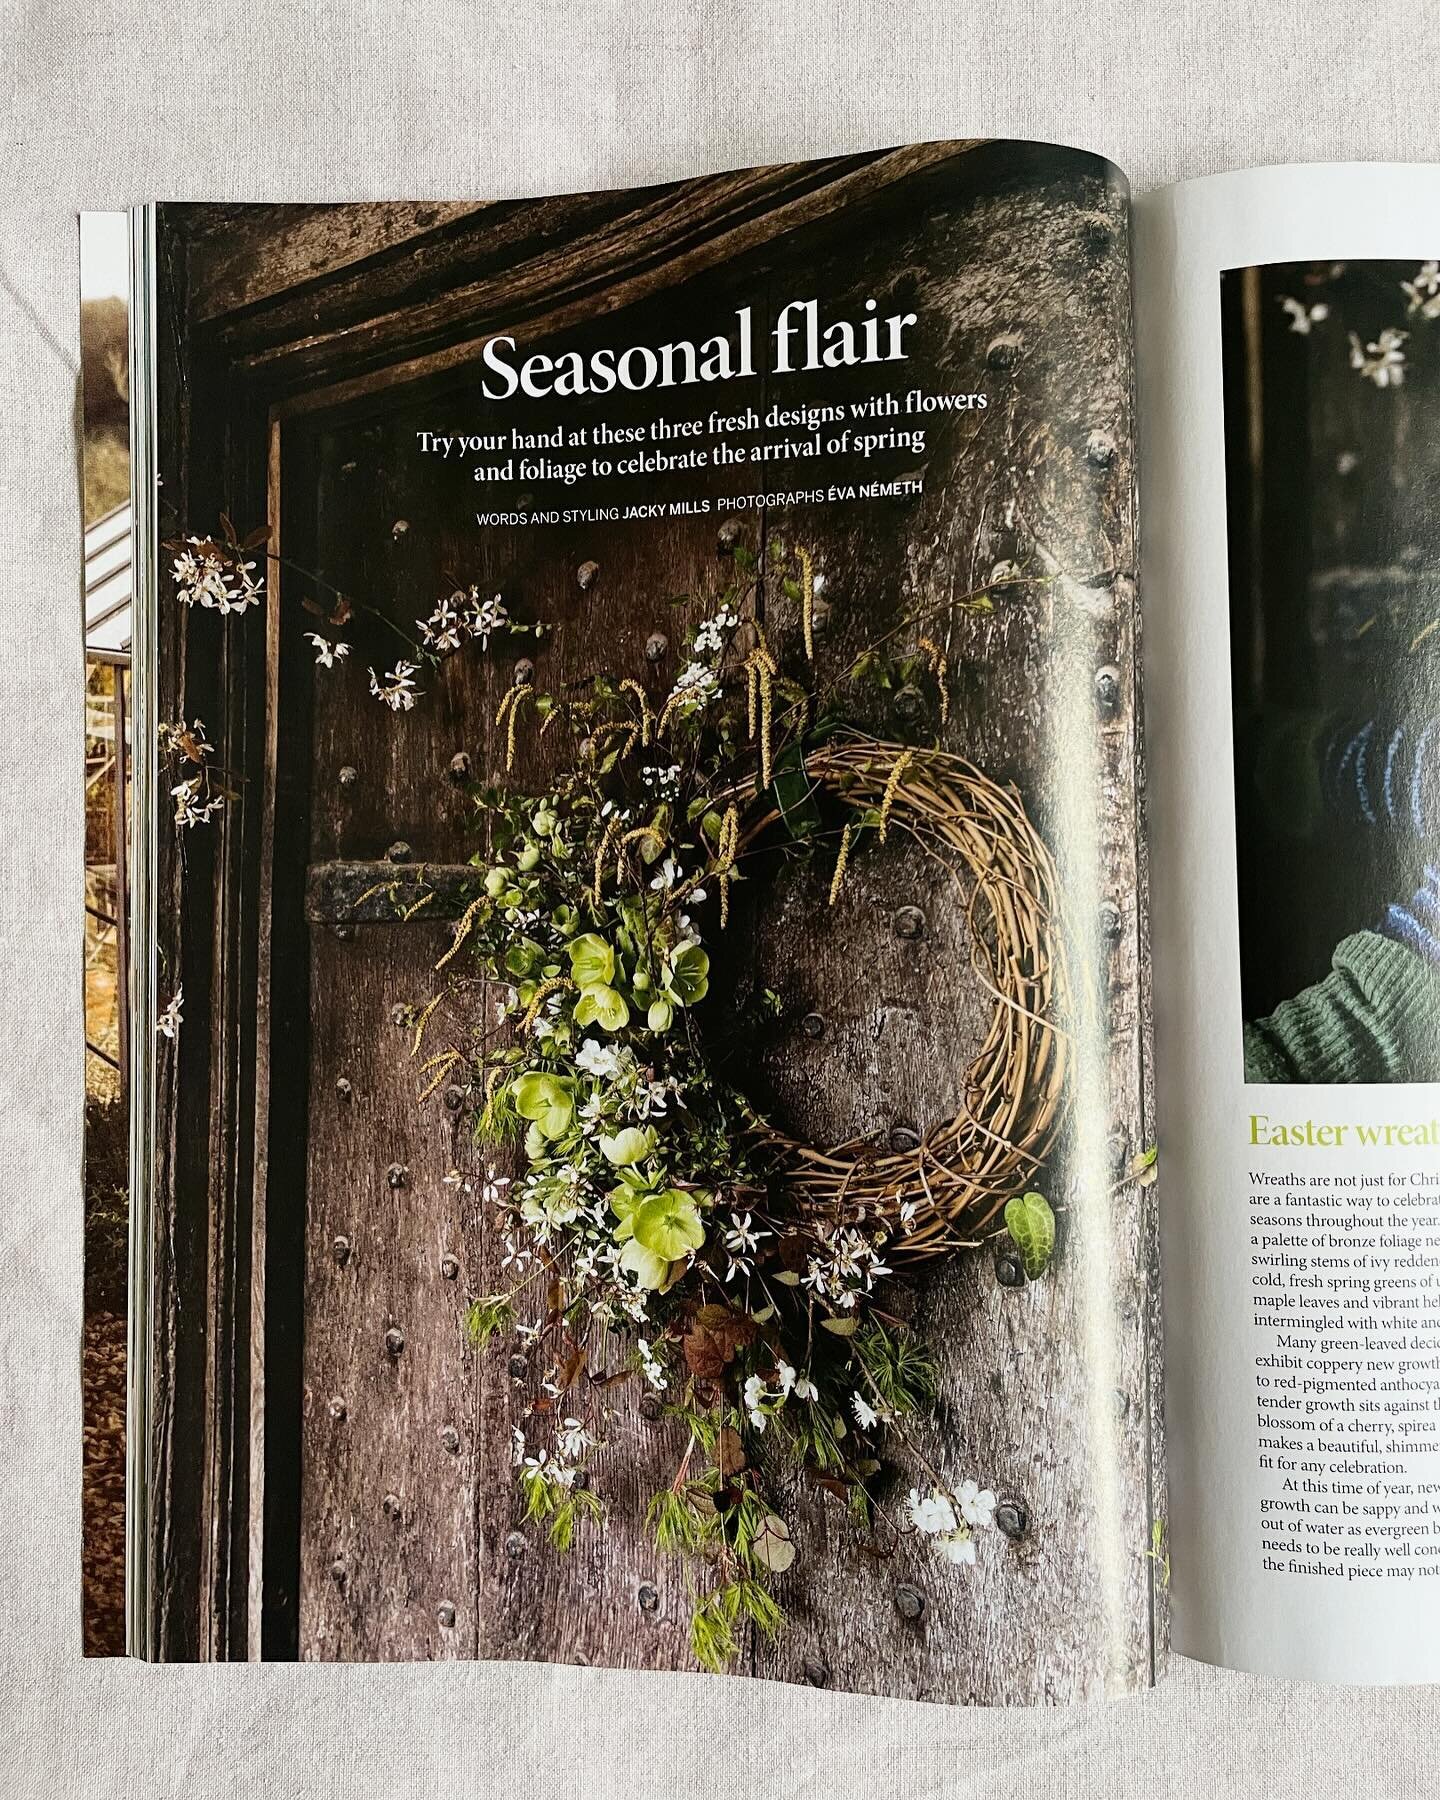 One of the most beautiful wreaths I have ever seen. I loved working on this feature with Jacky @4jacquelinemills for @gardens_illustrated Thank you so much for all involved. The full story and other inspirational tips from Jacky are in thr current (M